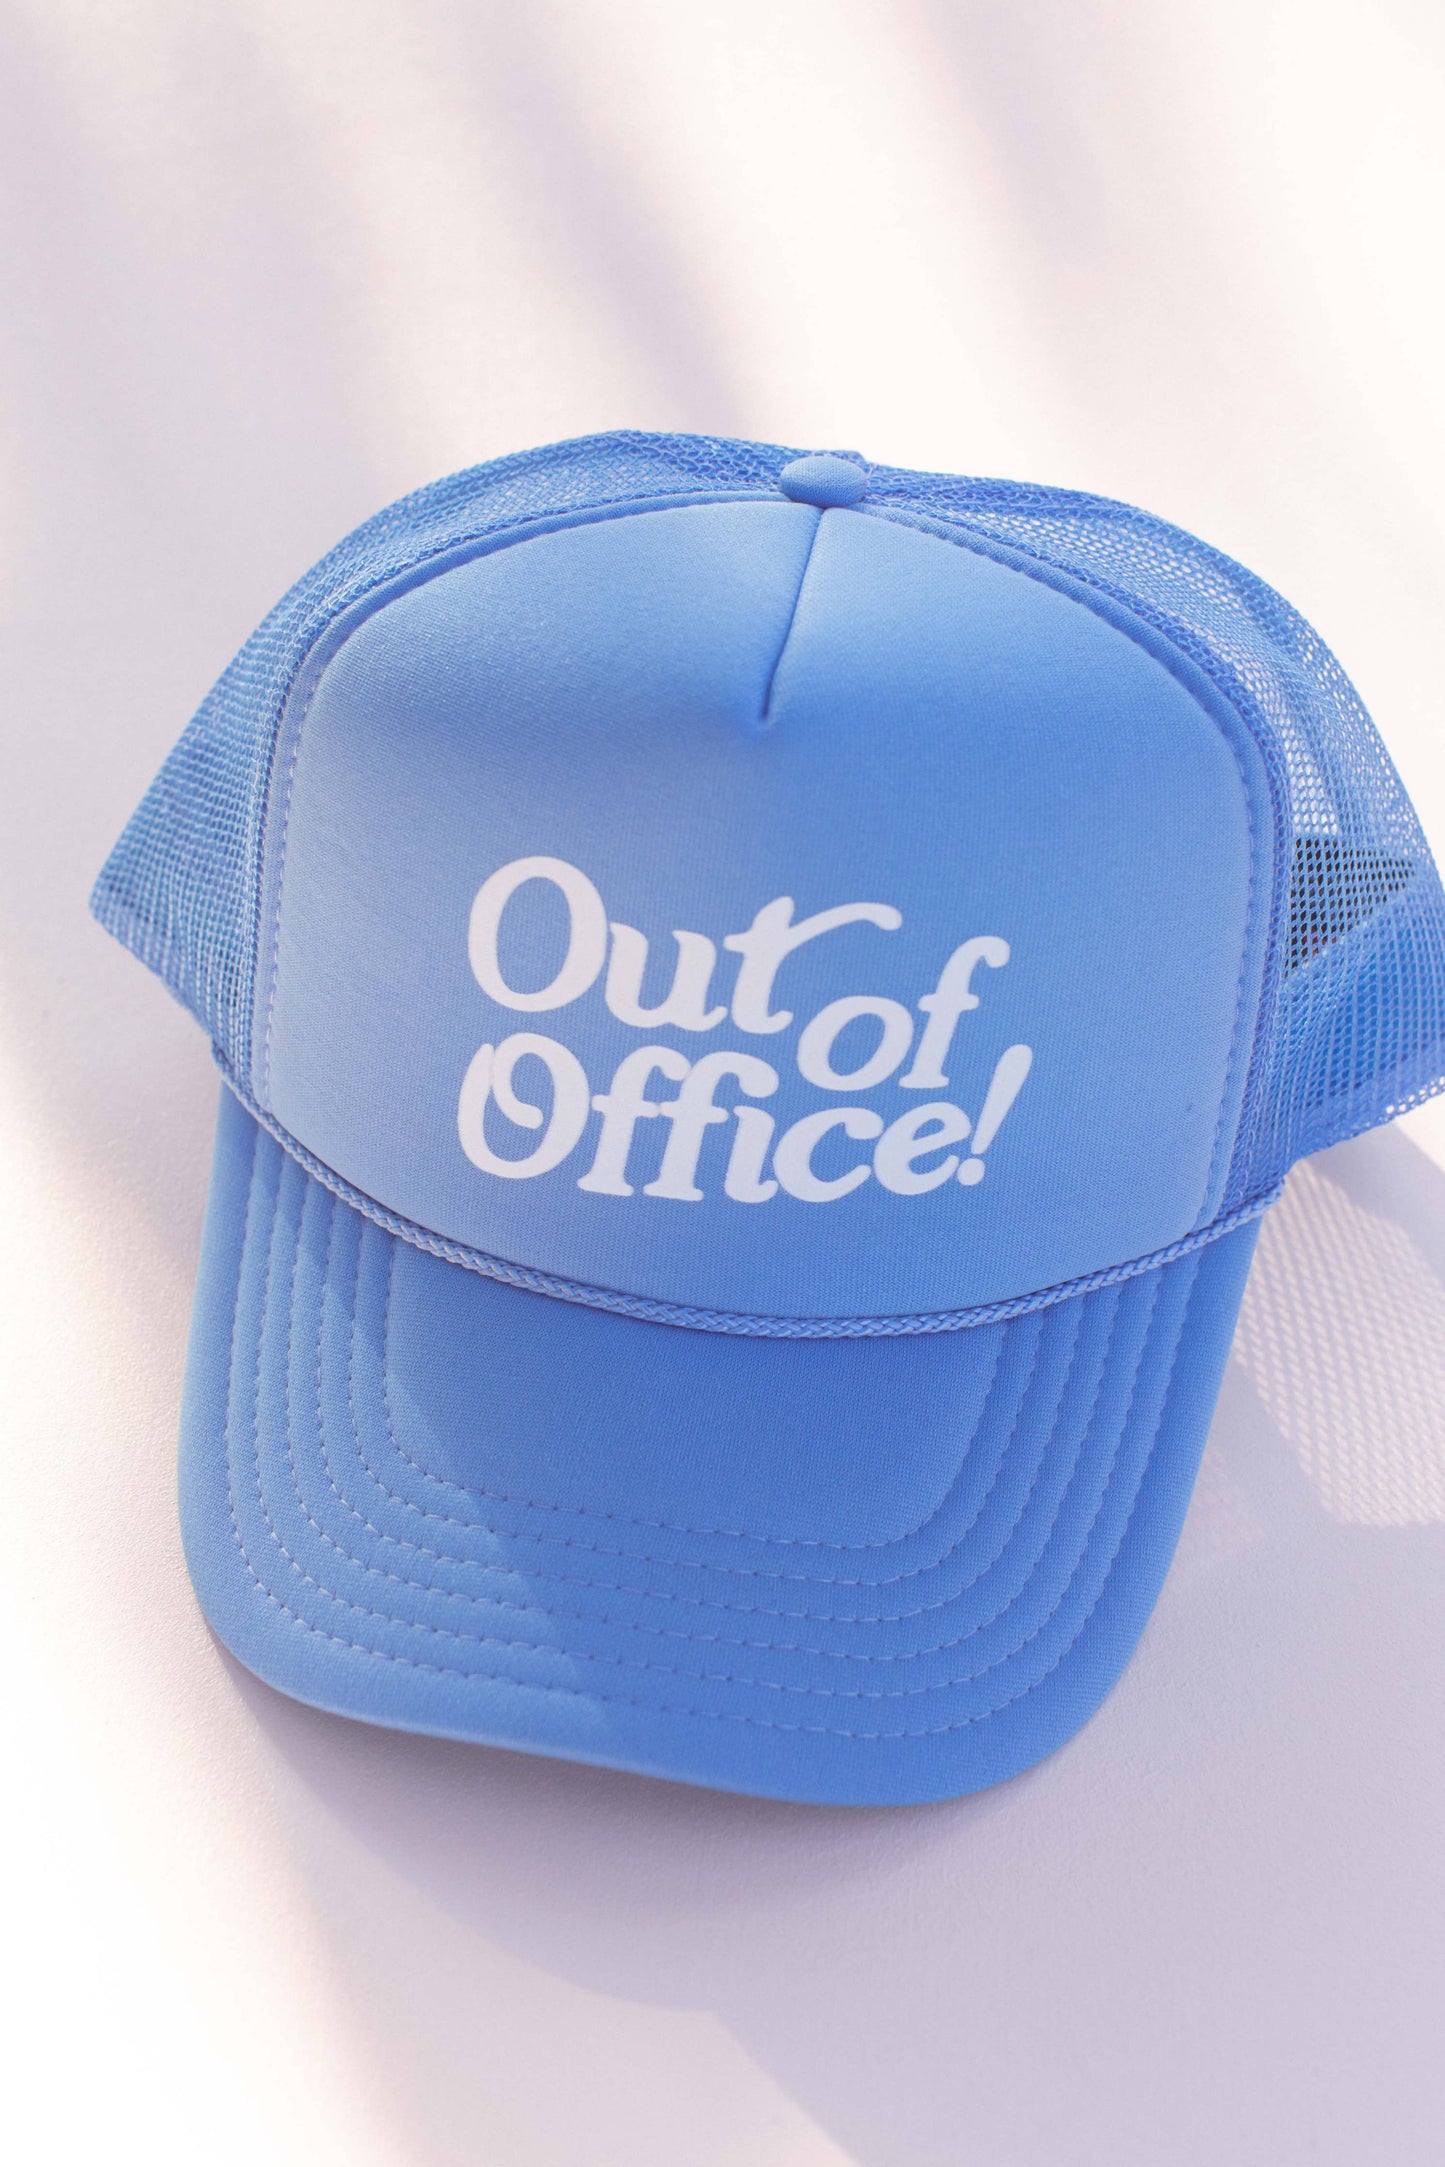 Out of Office Trucker Hat Cap